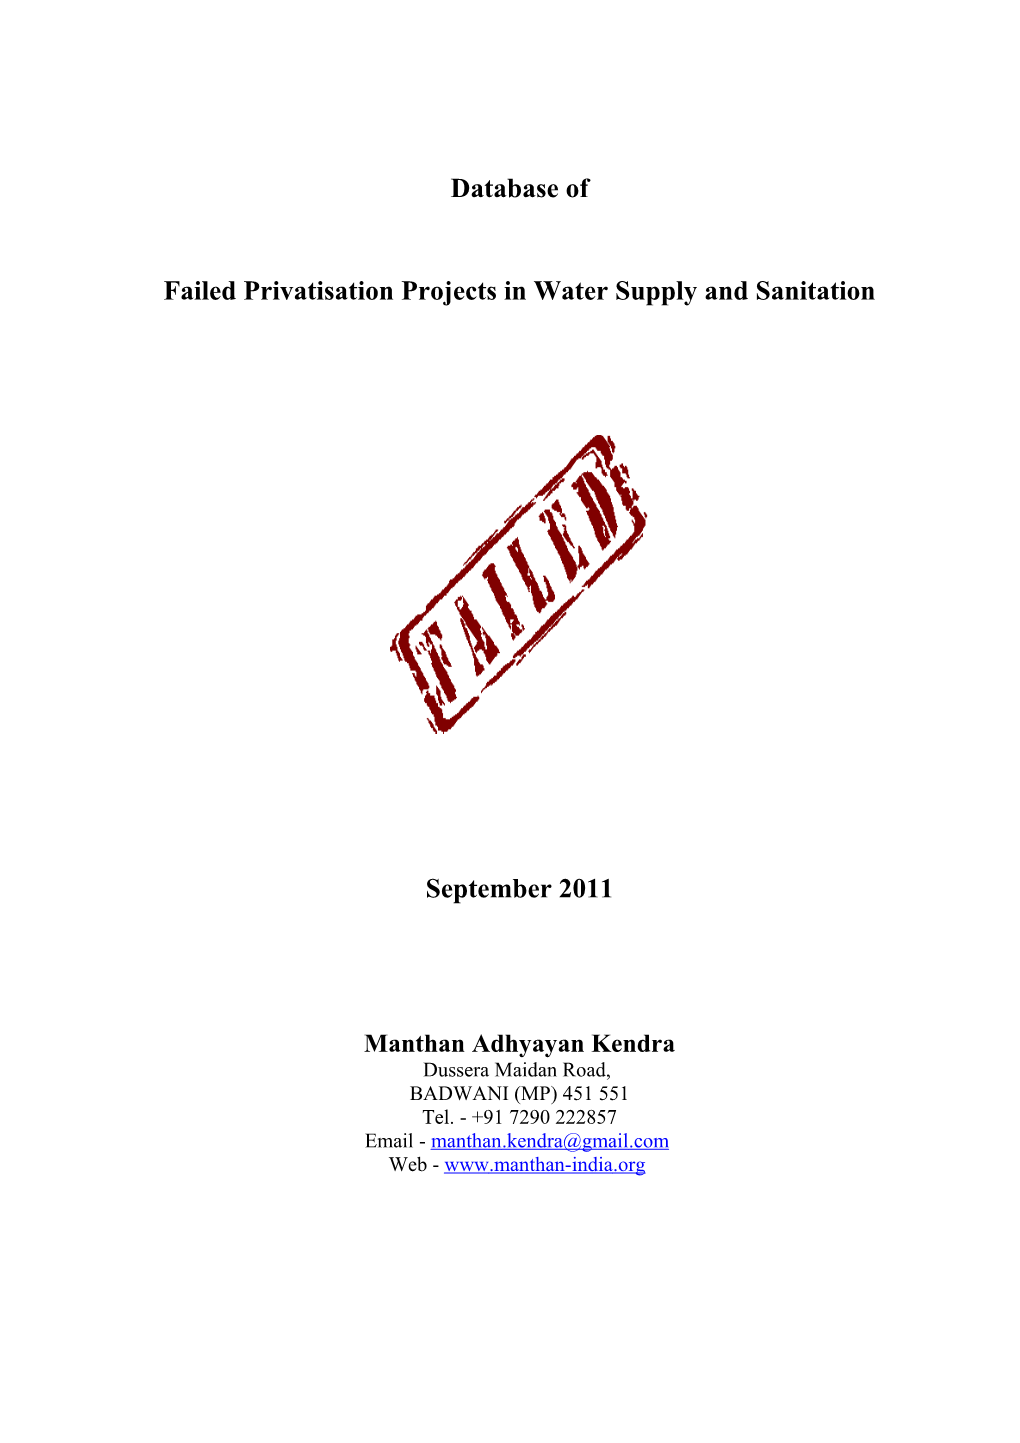 List of Failed Privatisation Projects in Water Supply and Sanitation